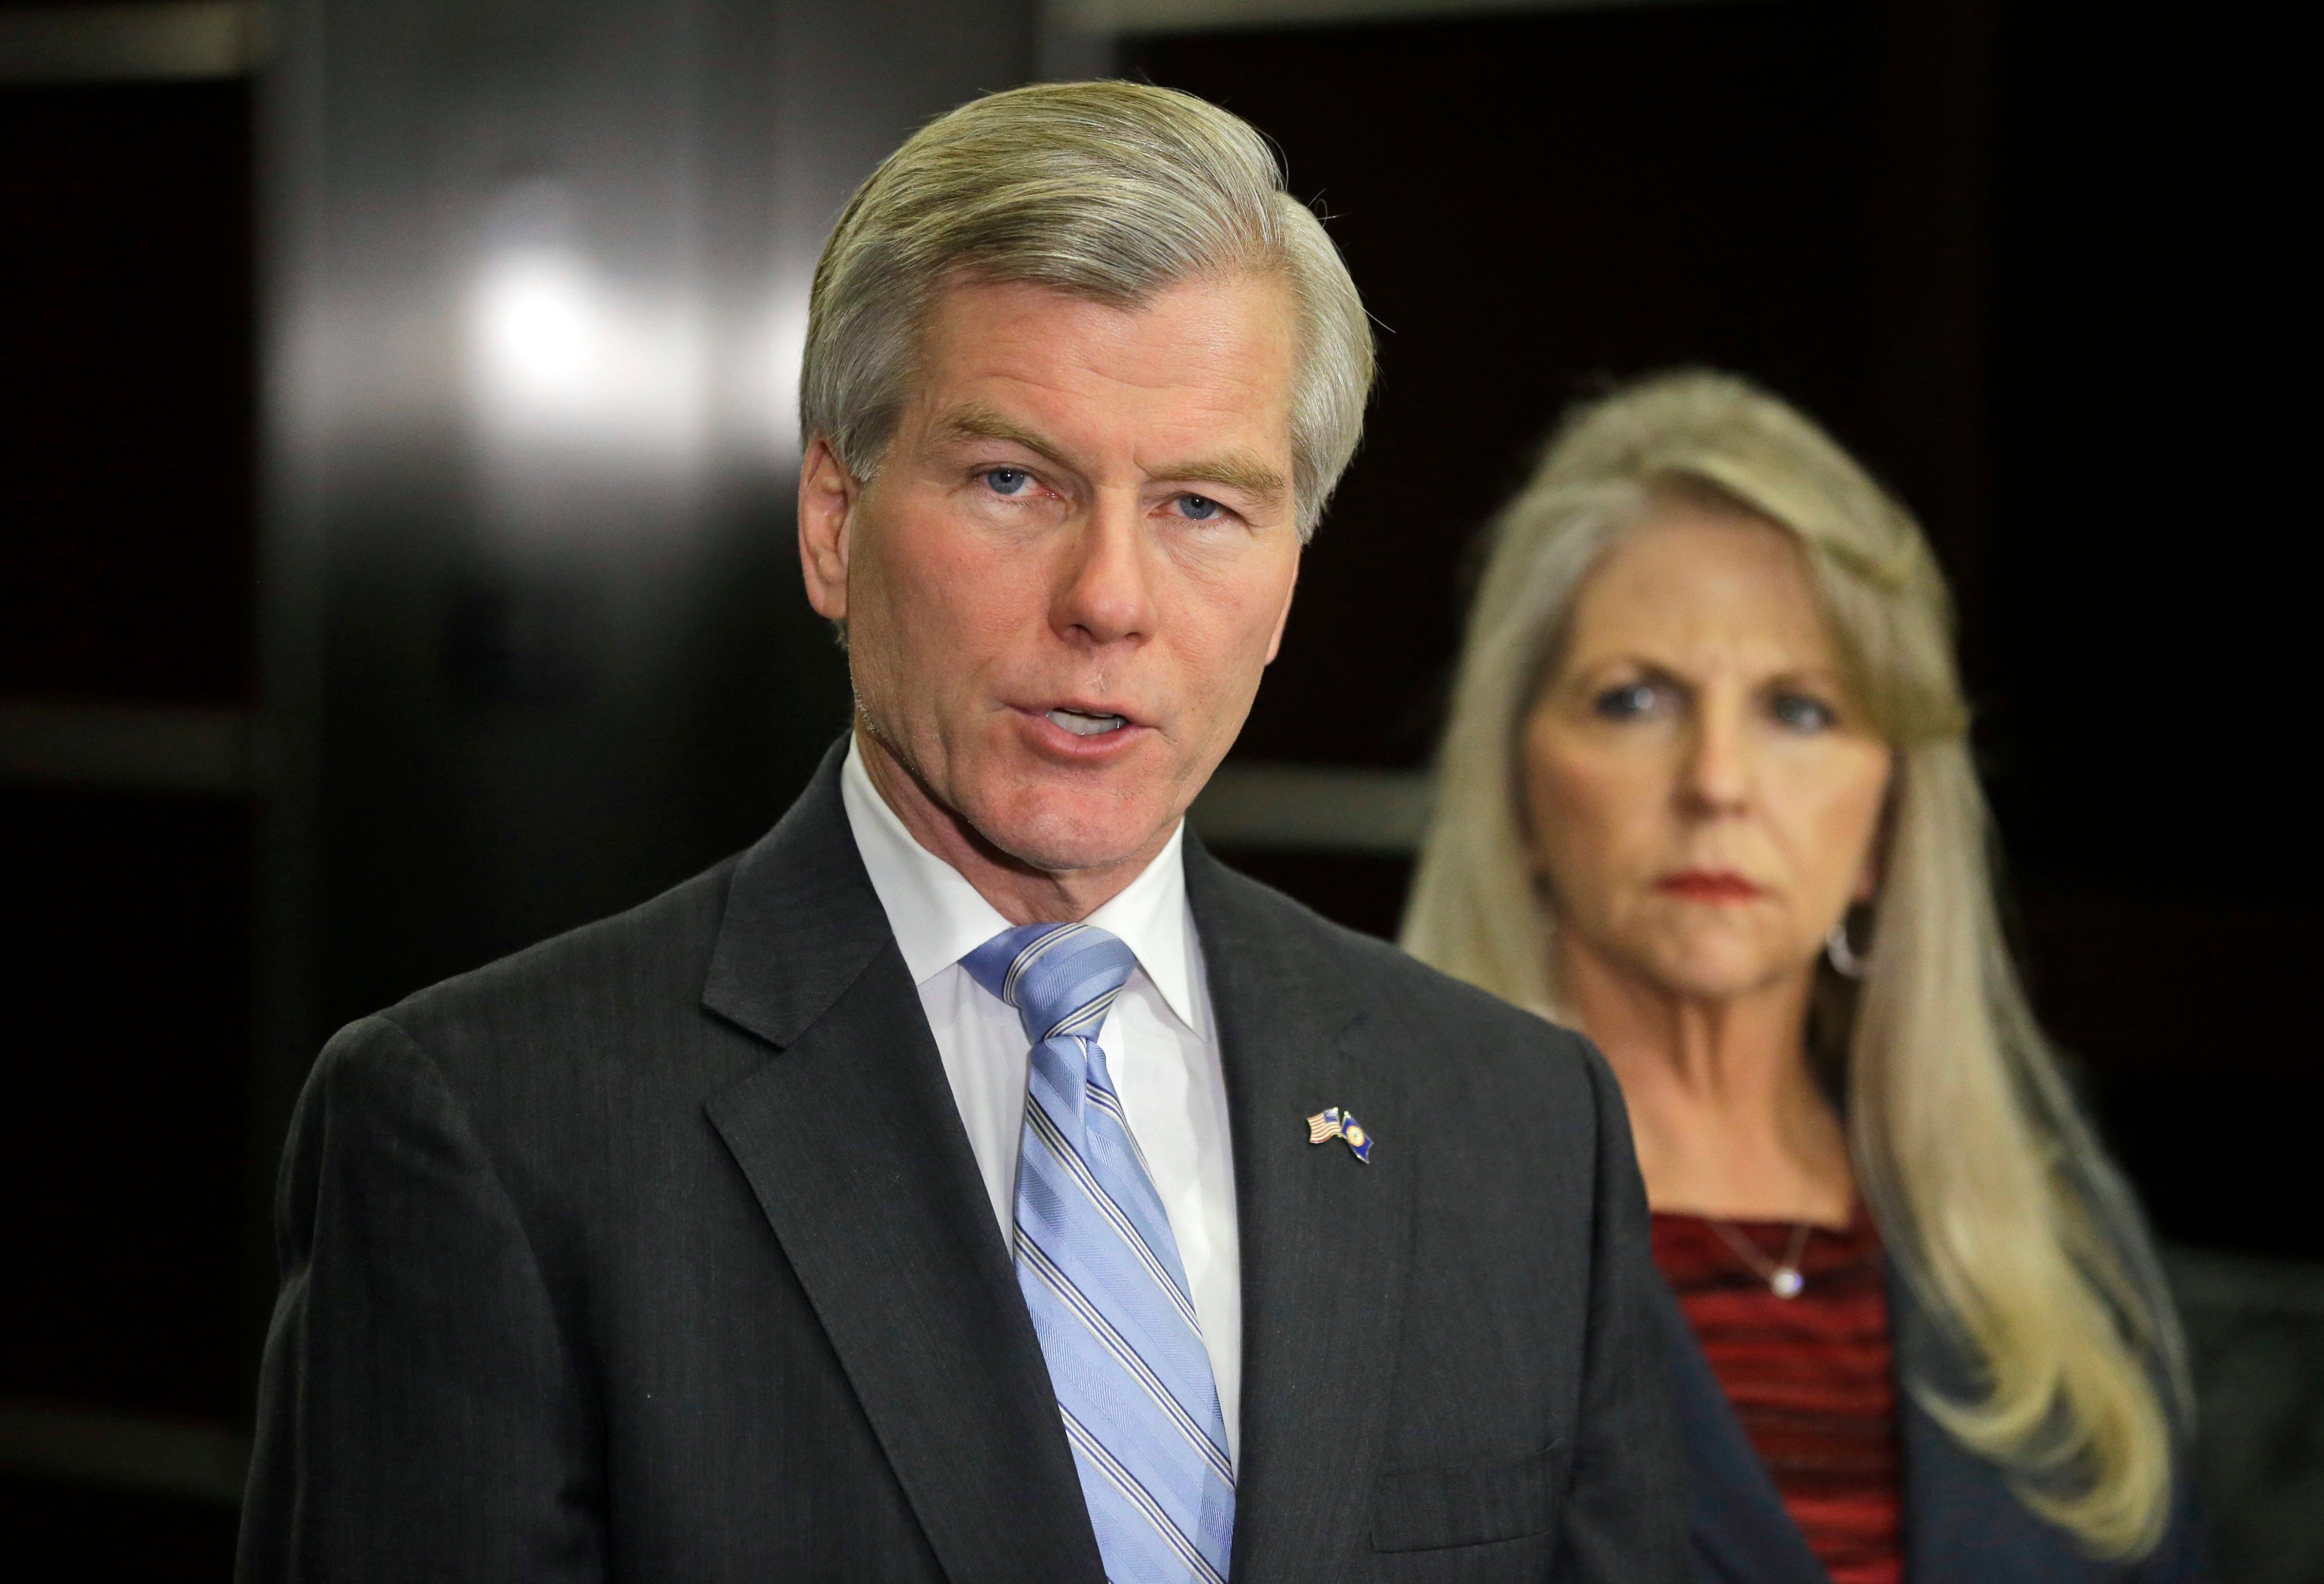 Former Virginia Gov. Bob McDonnell, accompanied by his wife, Maureen, speaks during a news conference in Richmond, Va., Jan. 21, 2014. (Steve Helber—AP)